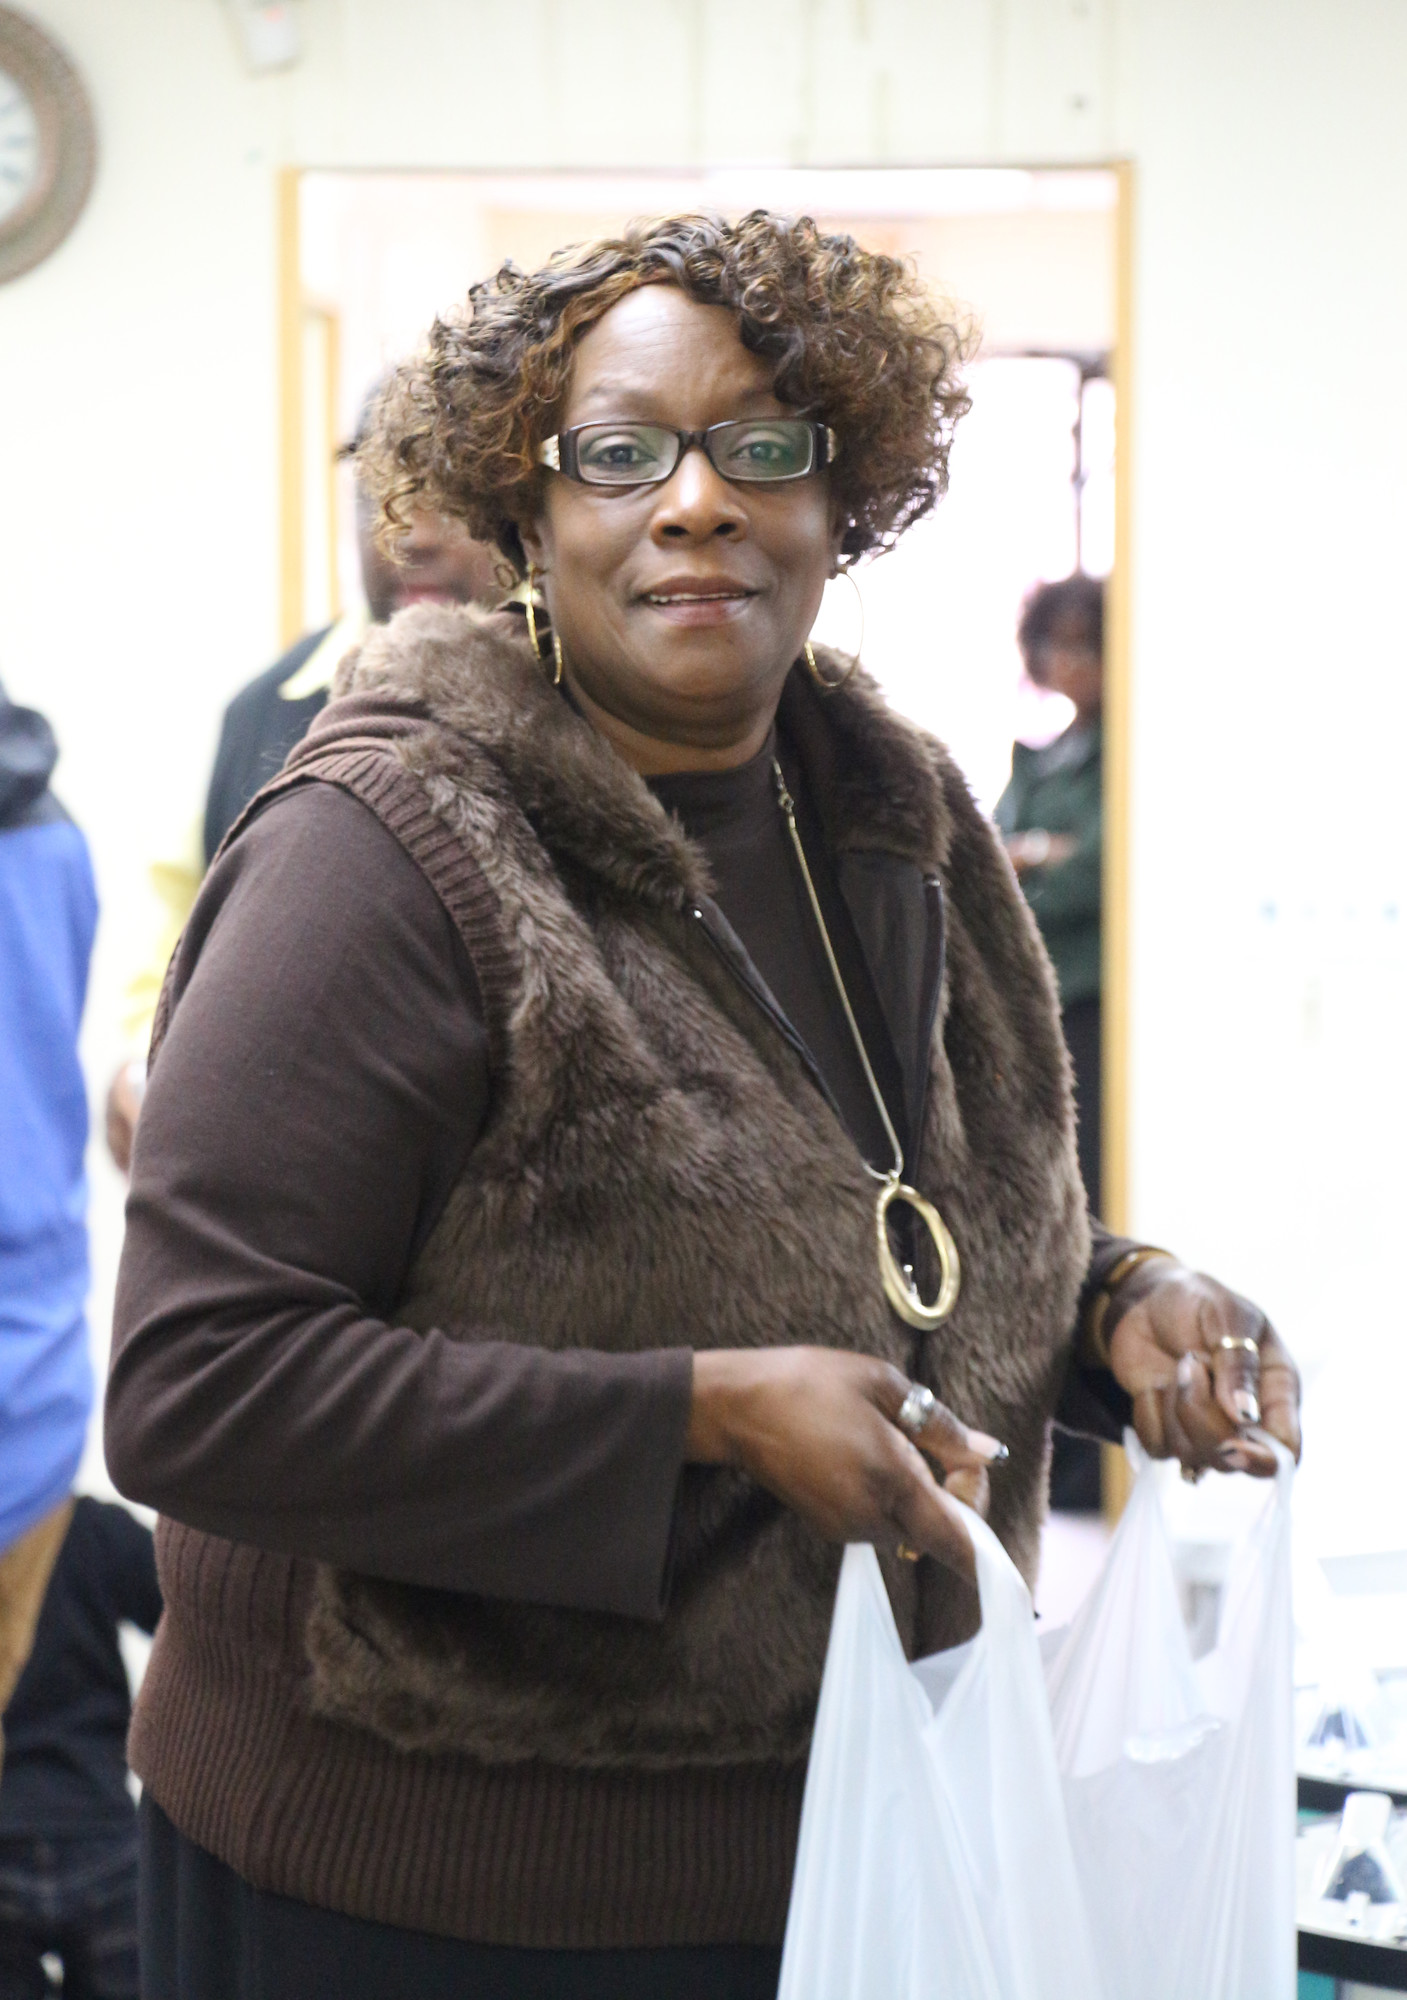 Katherine Williams, the founder of the Helping Hand Ministries, handed out meals.